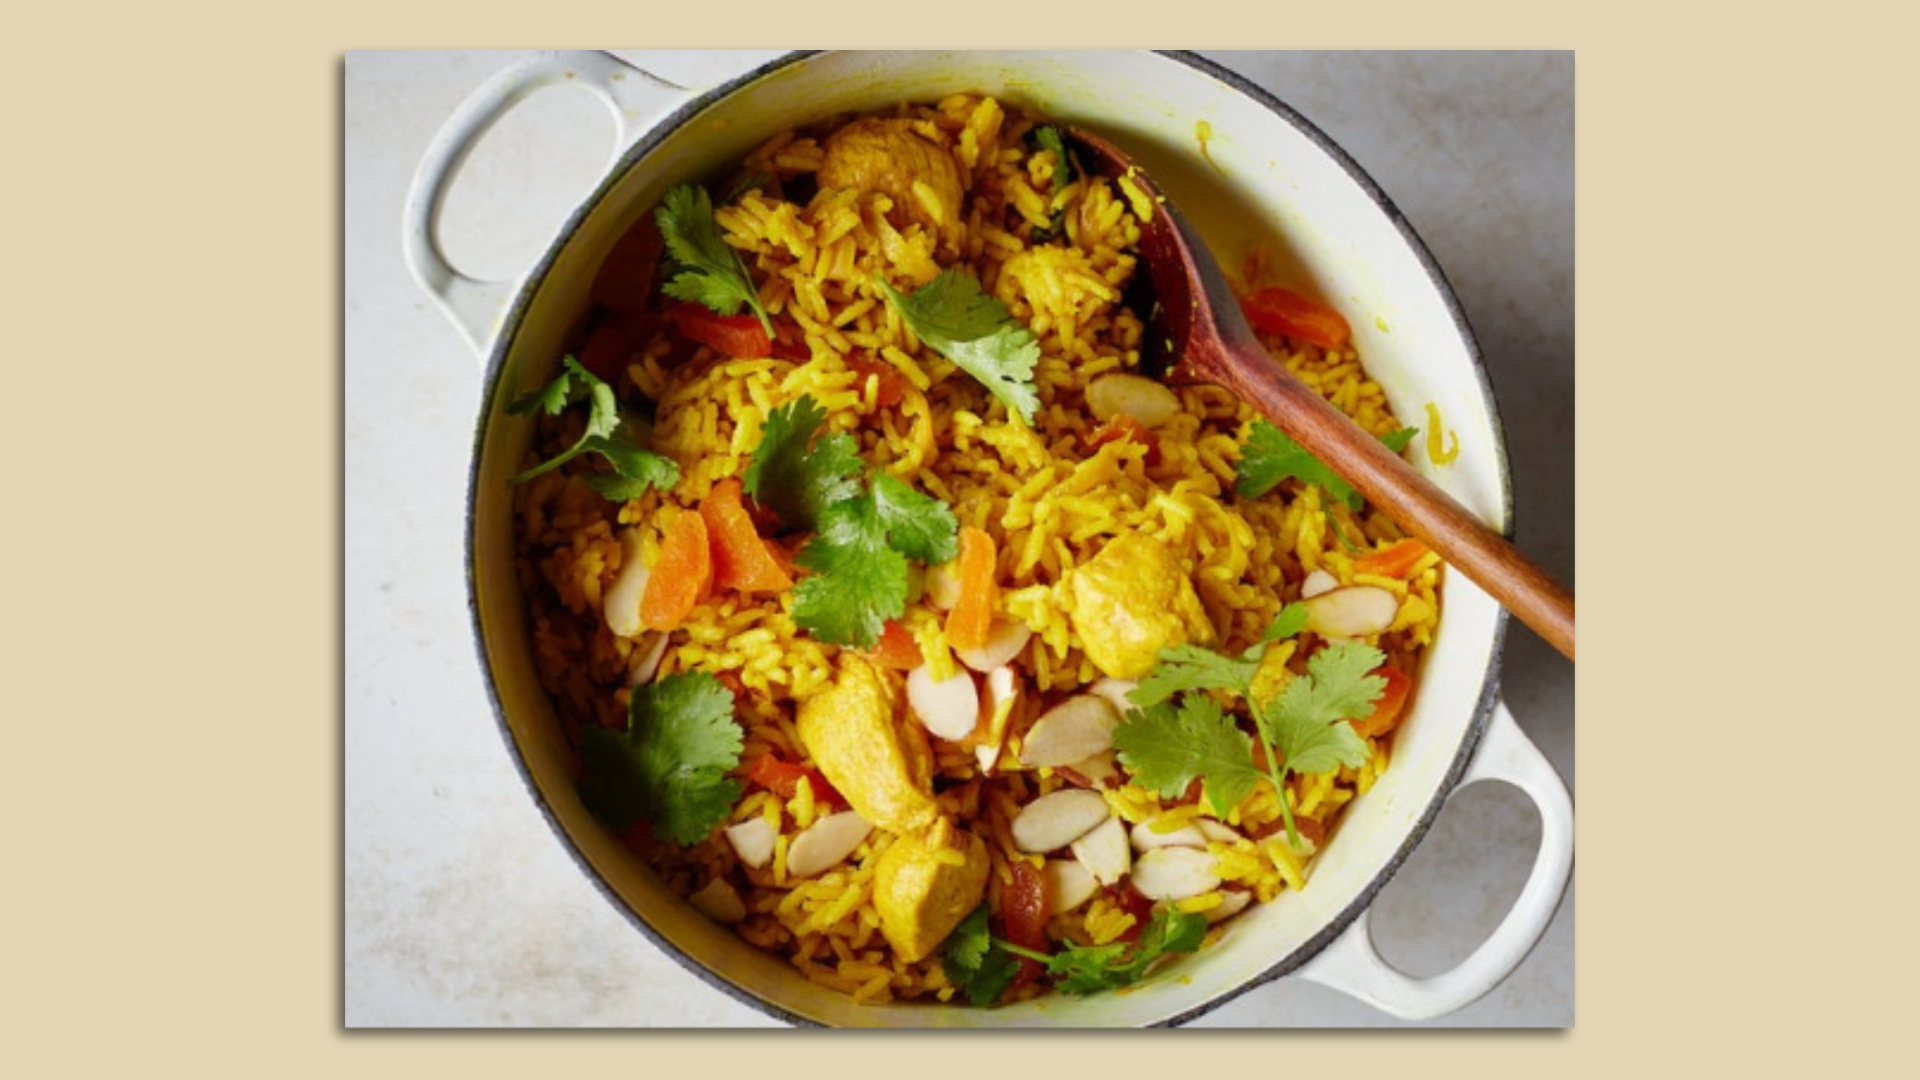 A mango-tinged chicken and rice dish.